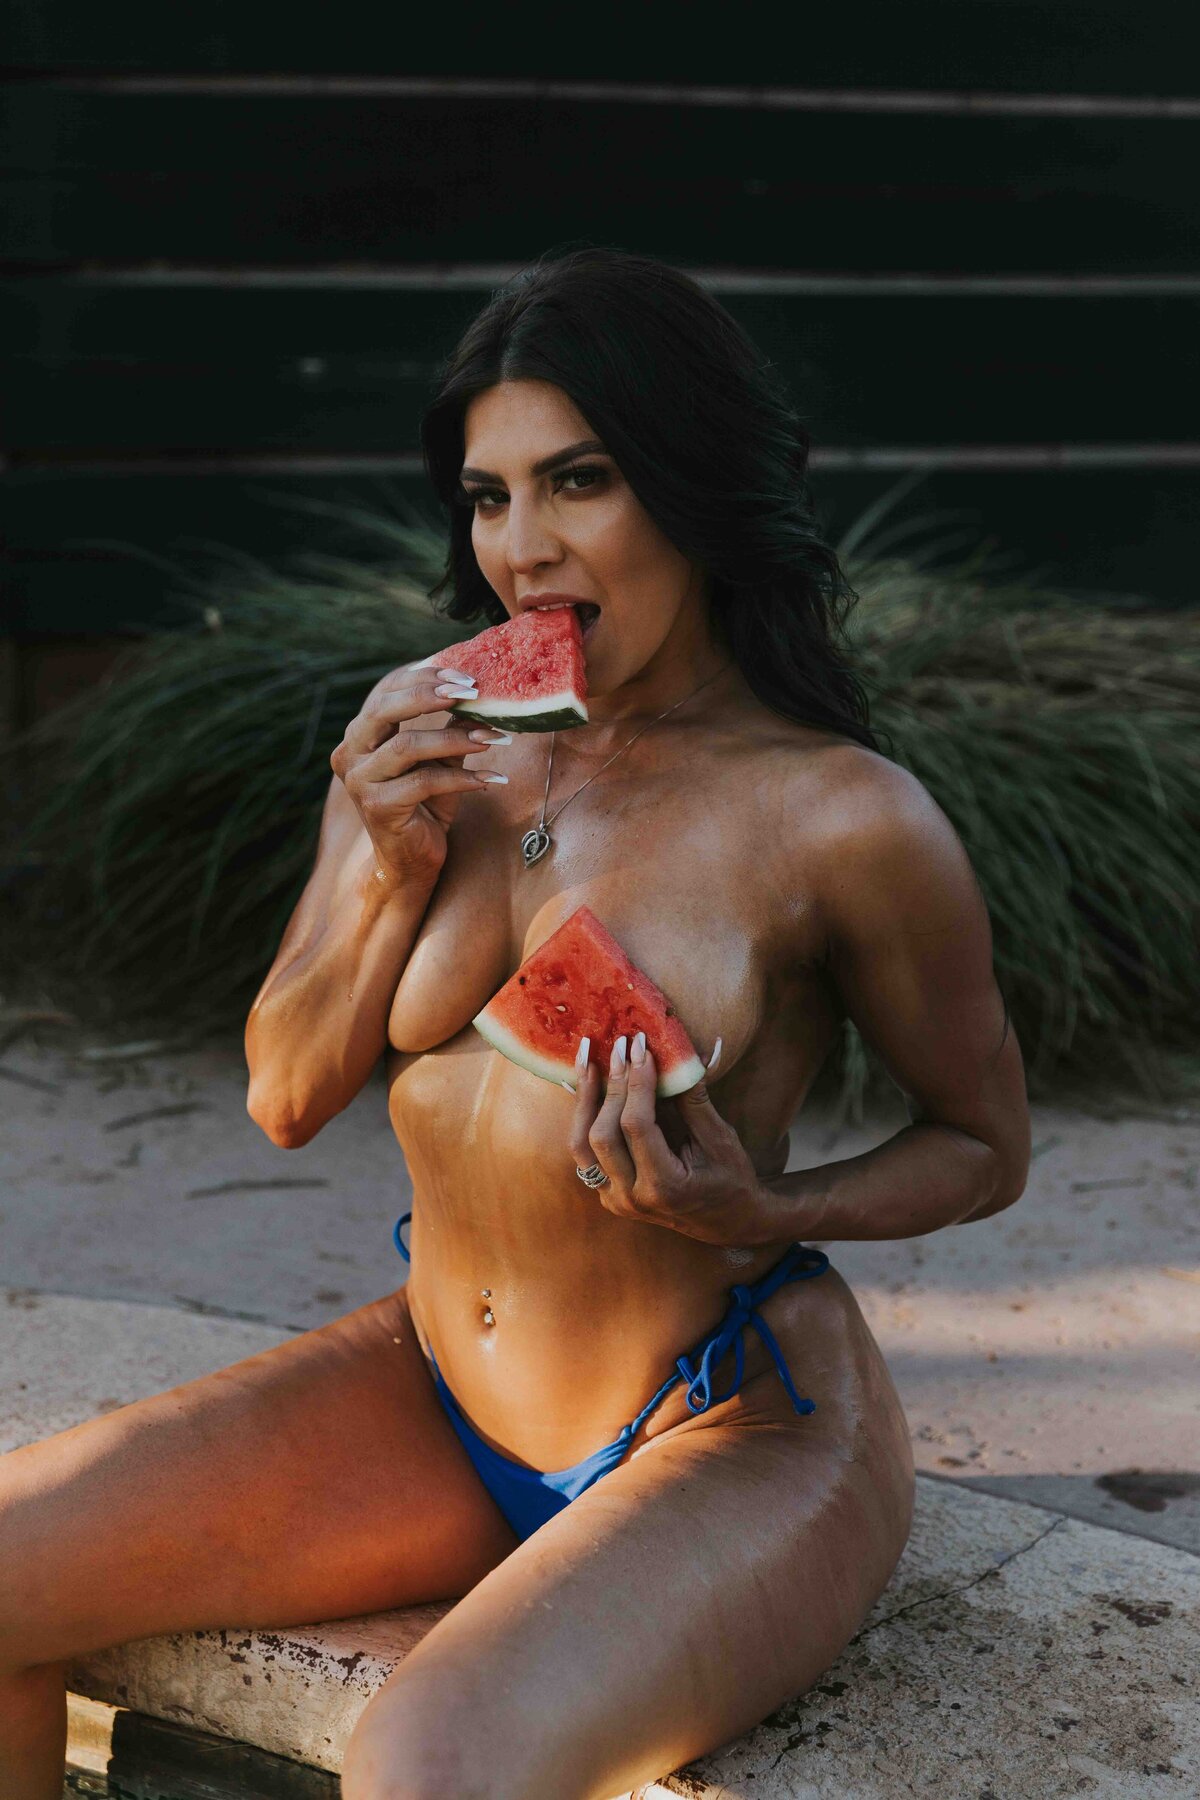 woman using watermelon as a prop during her pool photoshoot